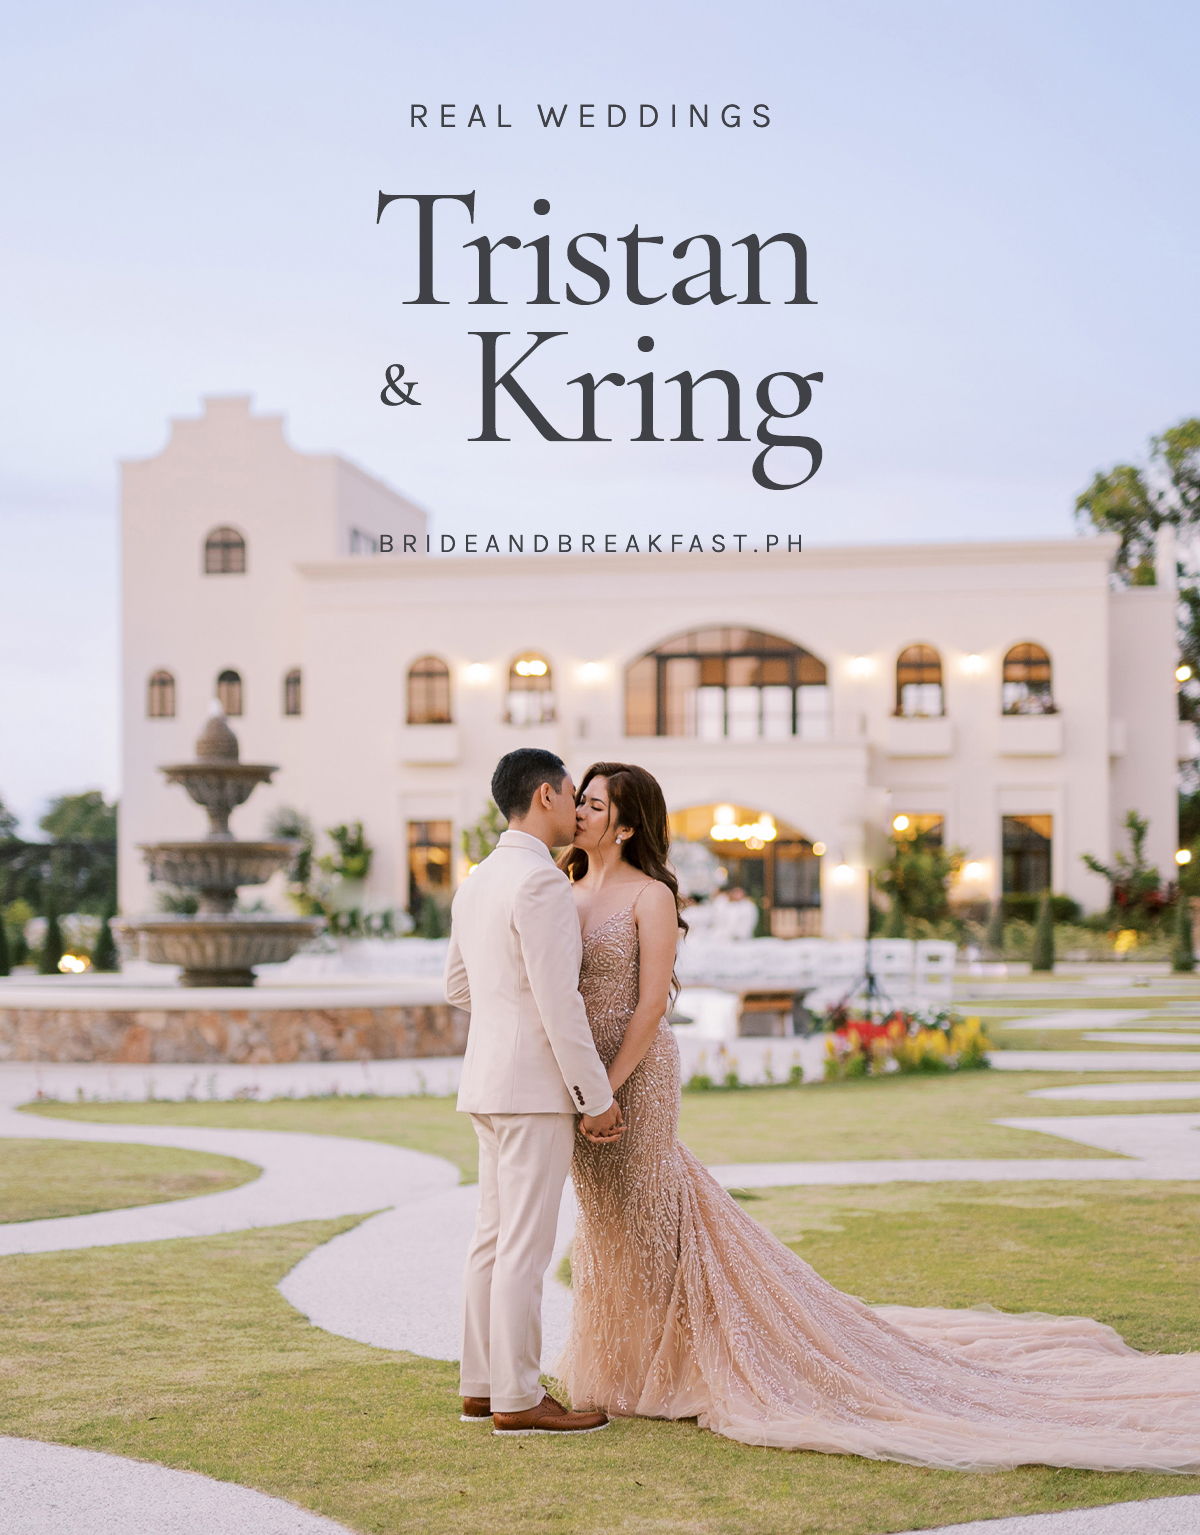 Tristan and Kring